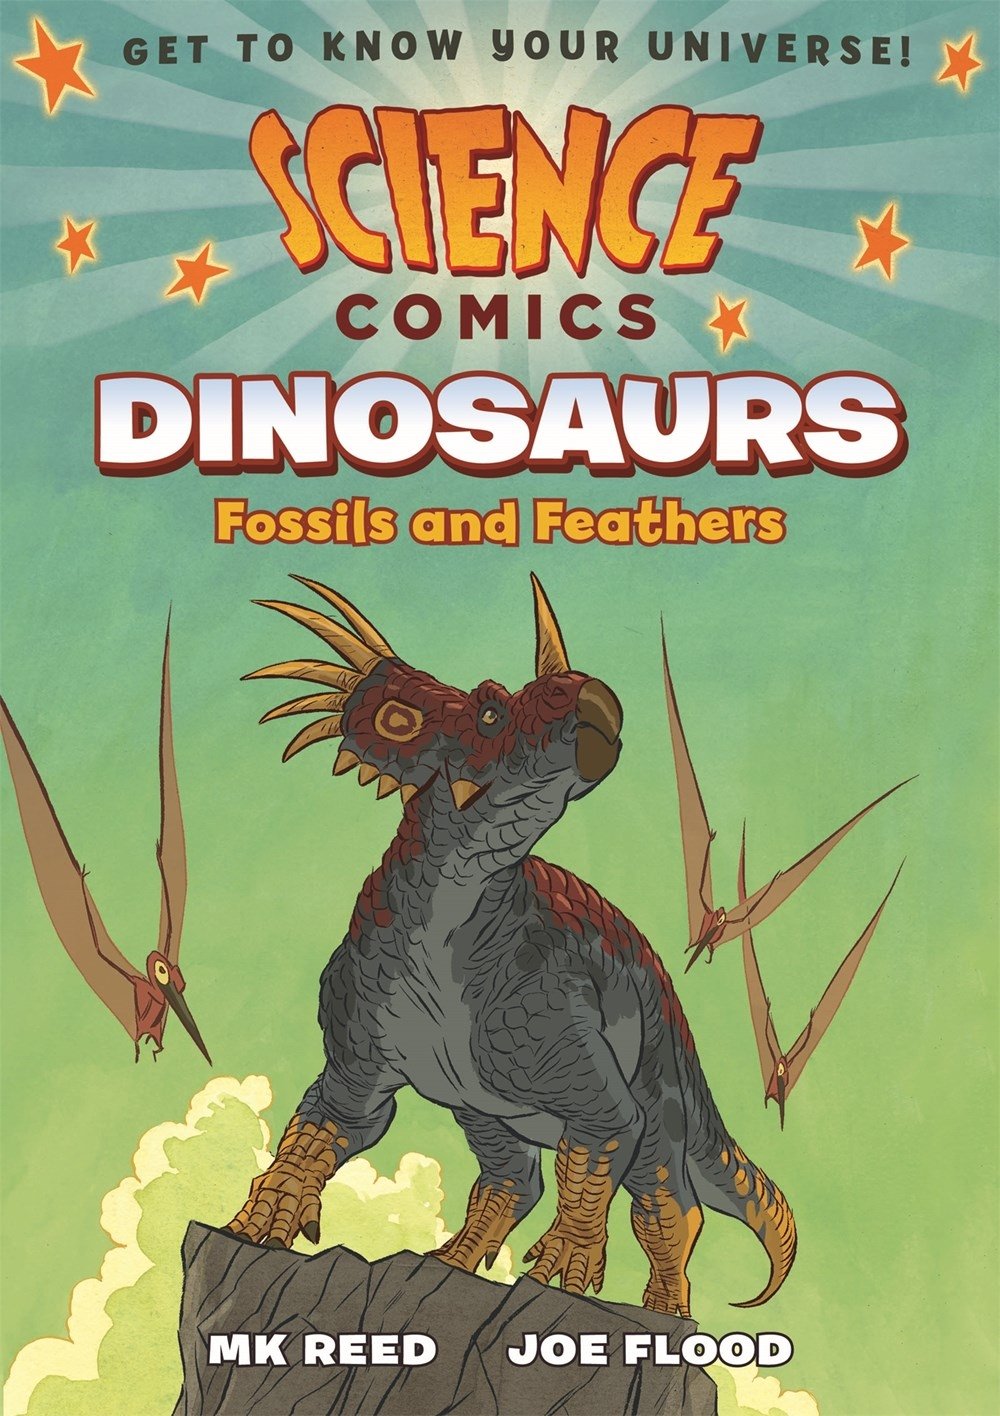 Science Comics Dinosaurs Fossils & Feathers Soft Cover Graphic Novel (2018 Printing)